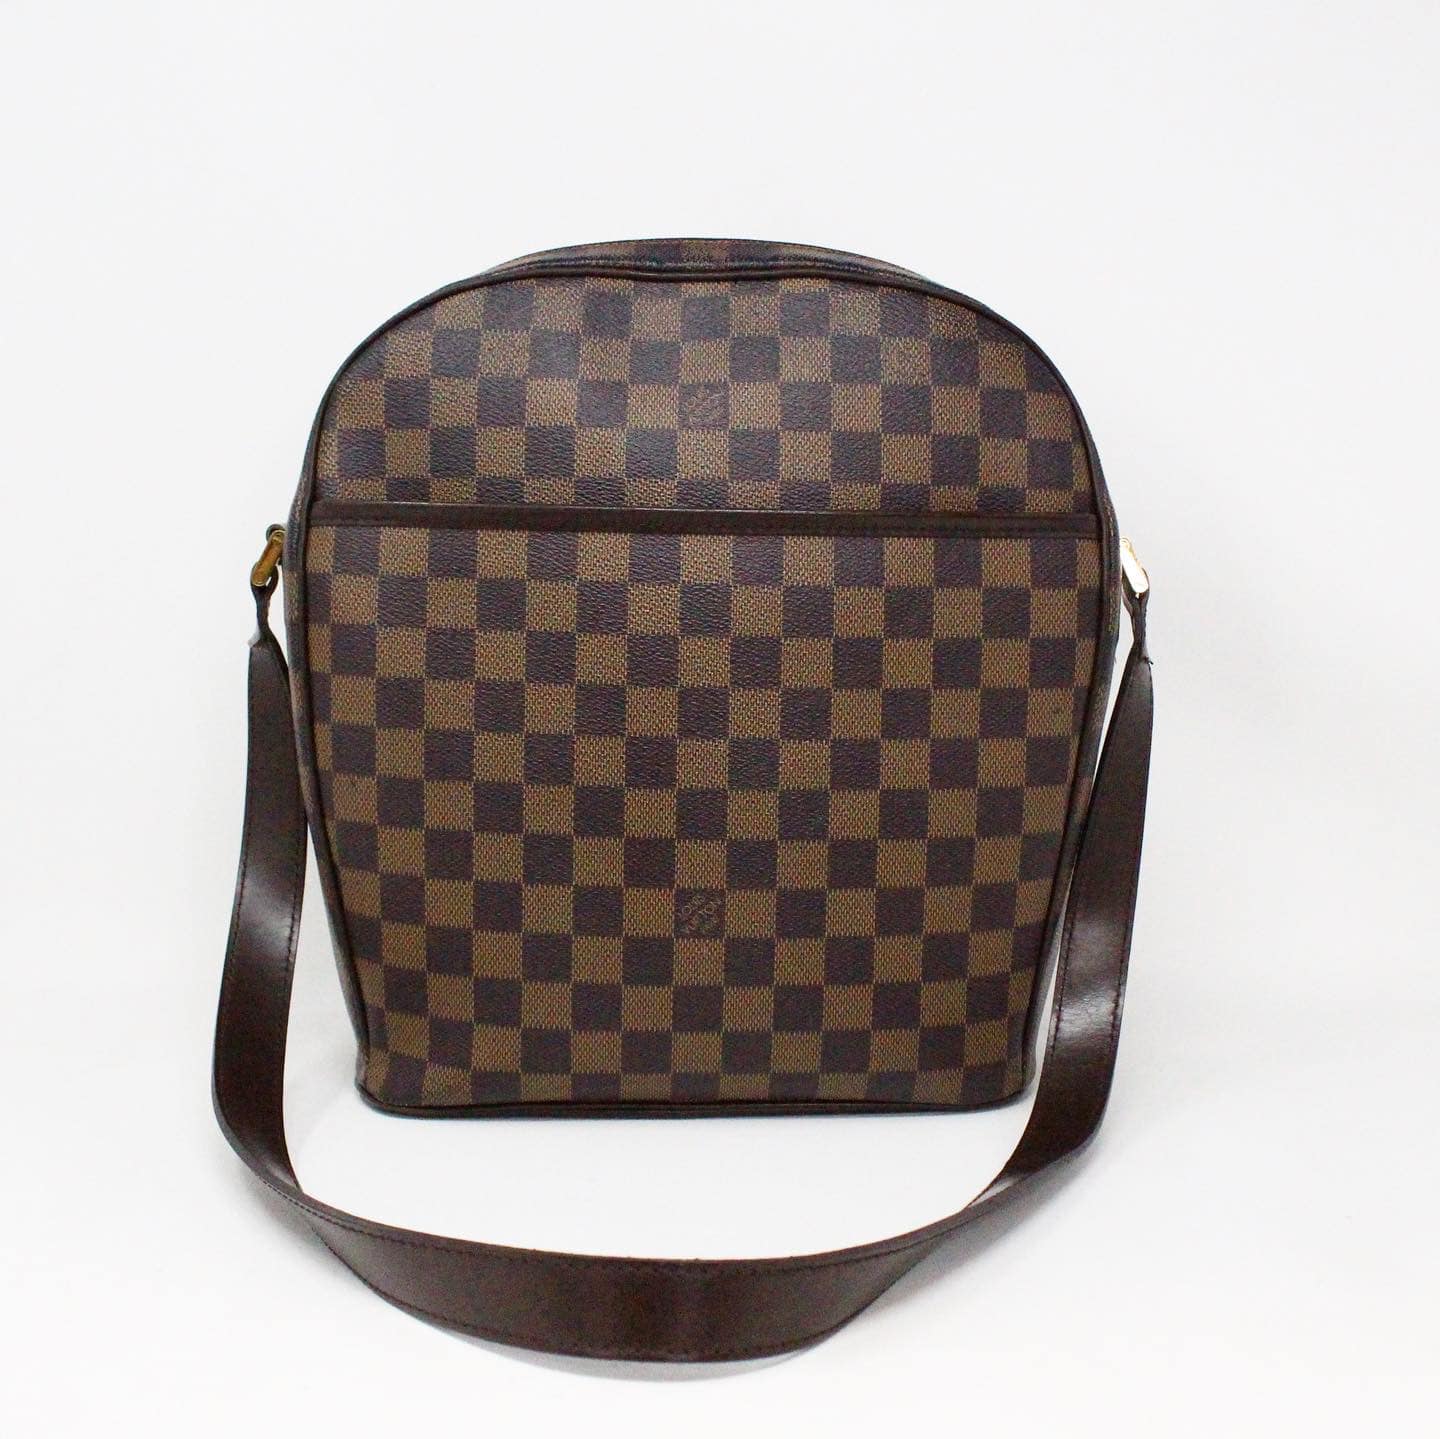 preowned louis vuitton bags for women clearance